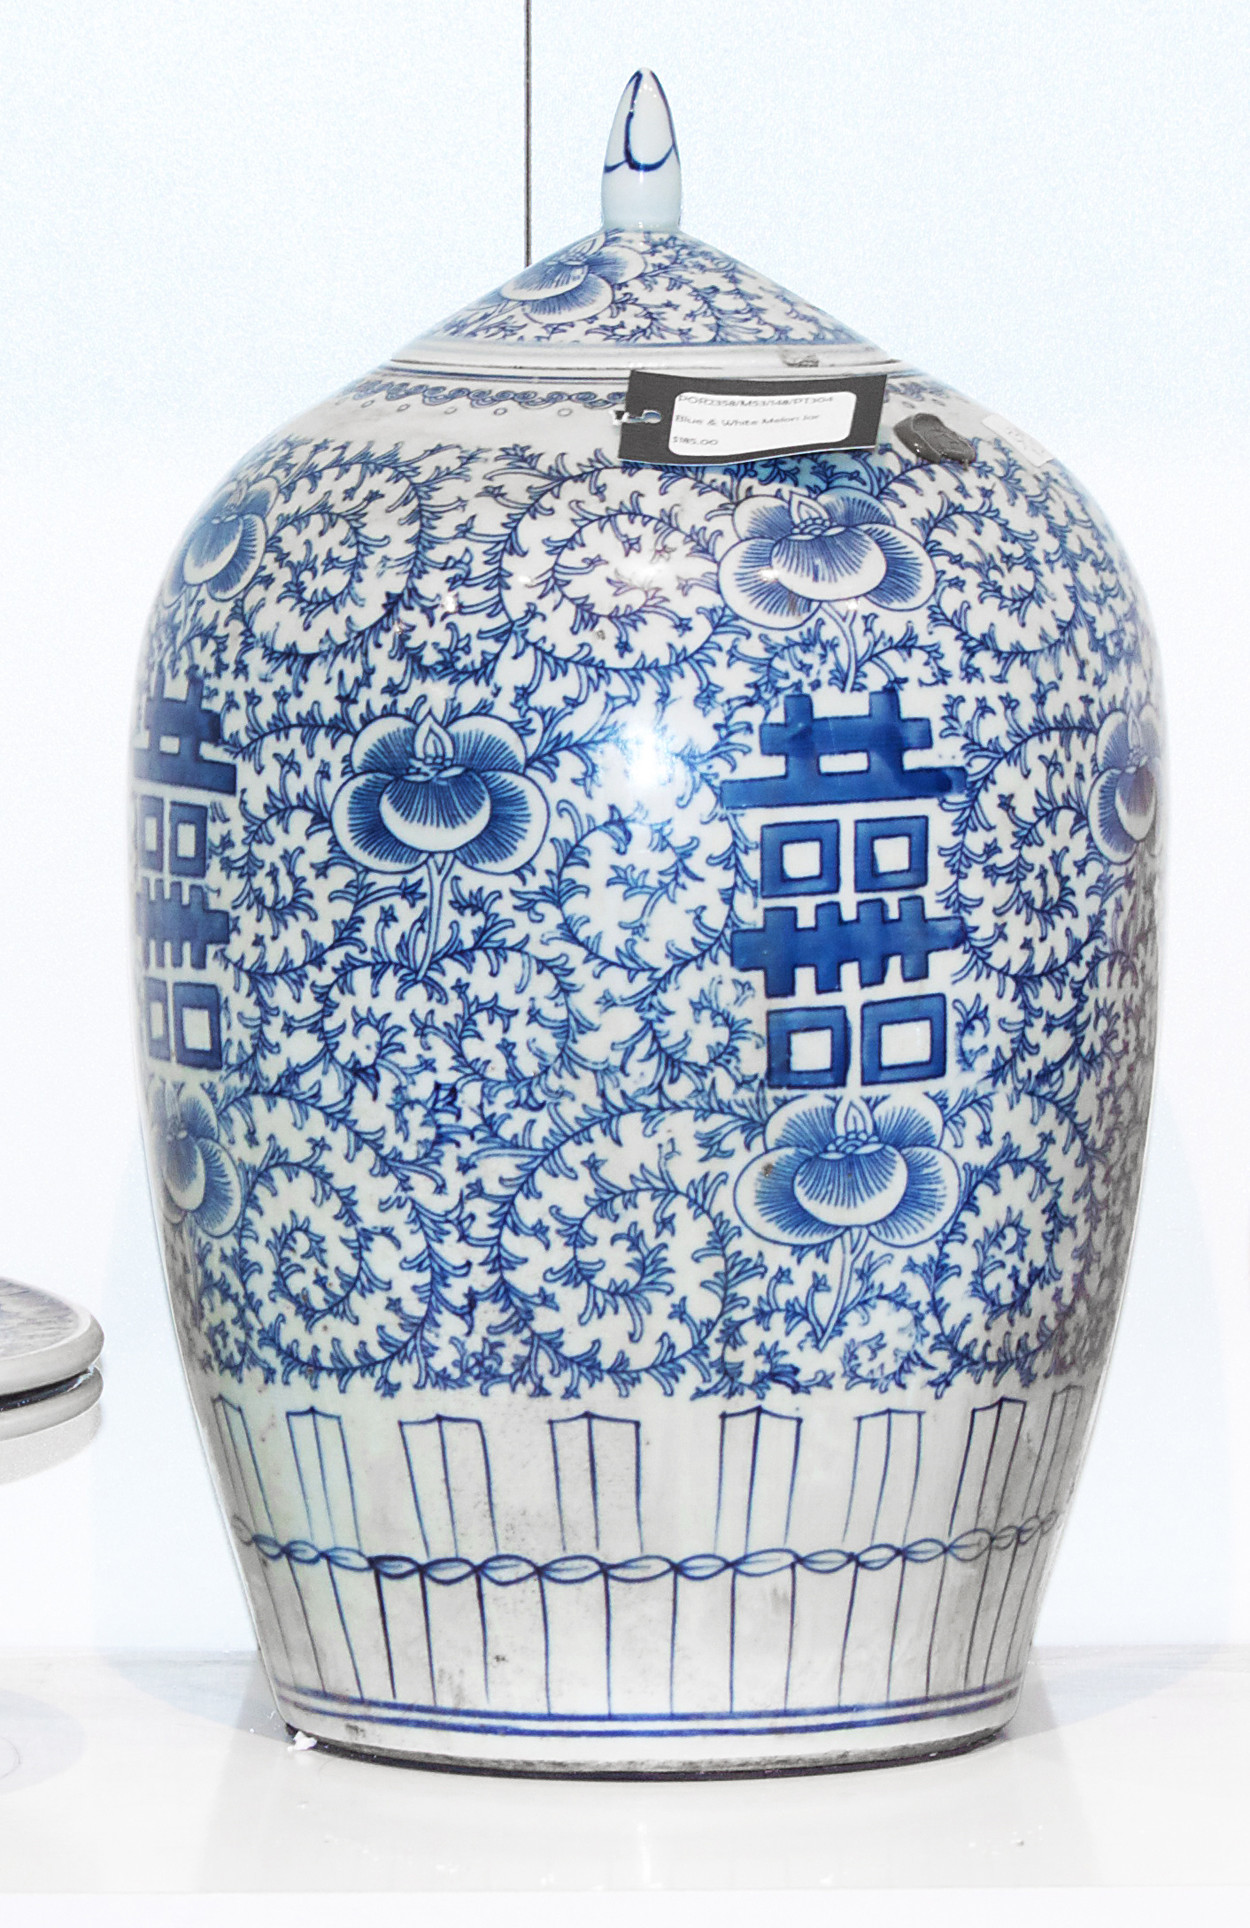 21 Lovable Blue and White Jars and Vases 2023 free download blue and white jars and vases of blue and white melon jar orient house inside blue and white melon jar